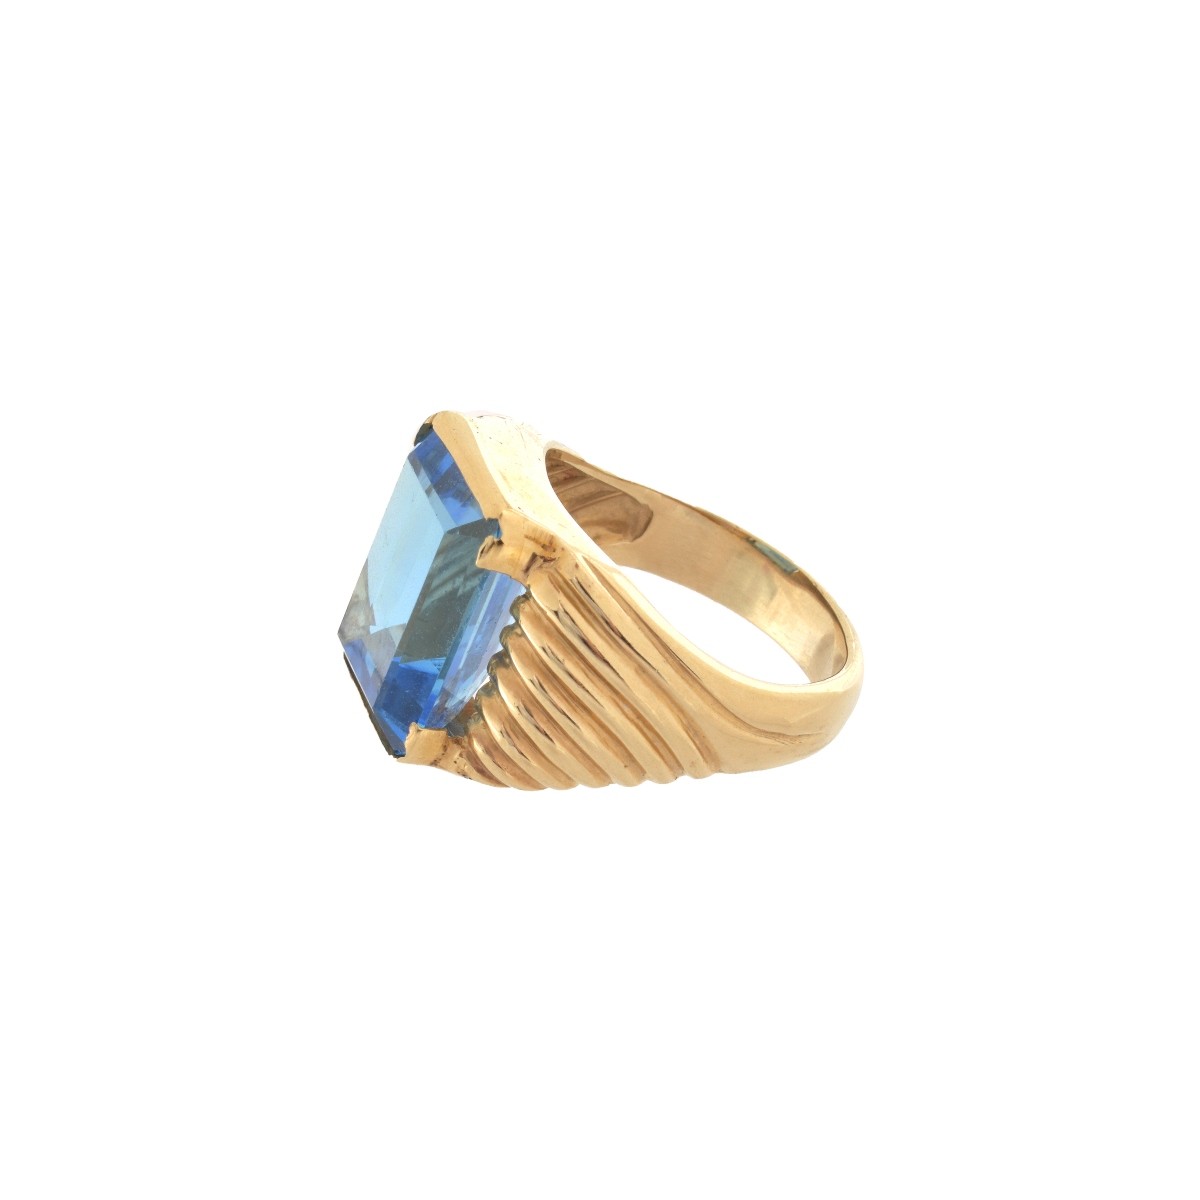 London Blue Topaz and 14K Ring